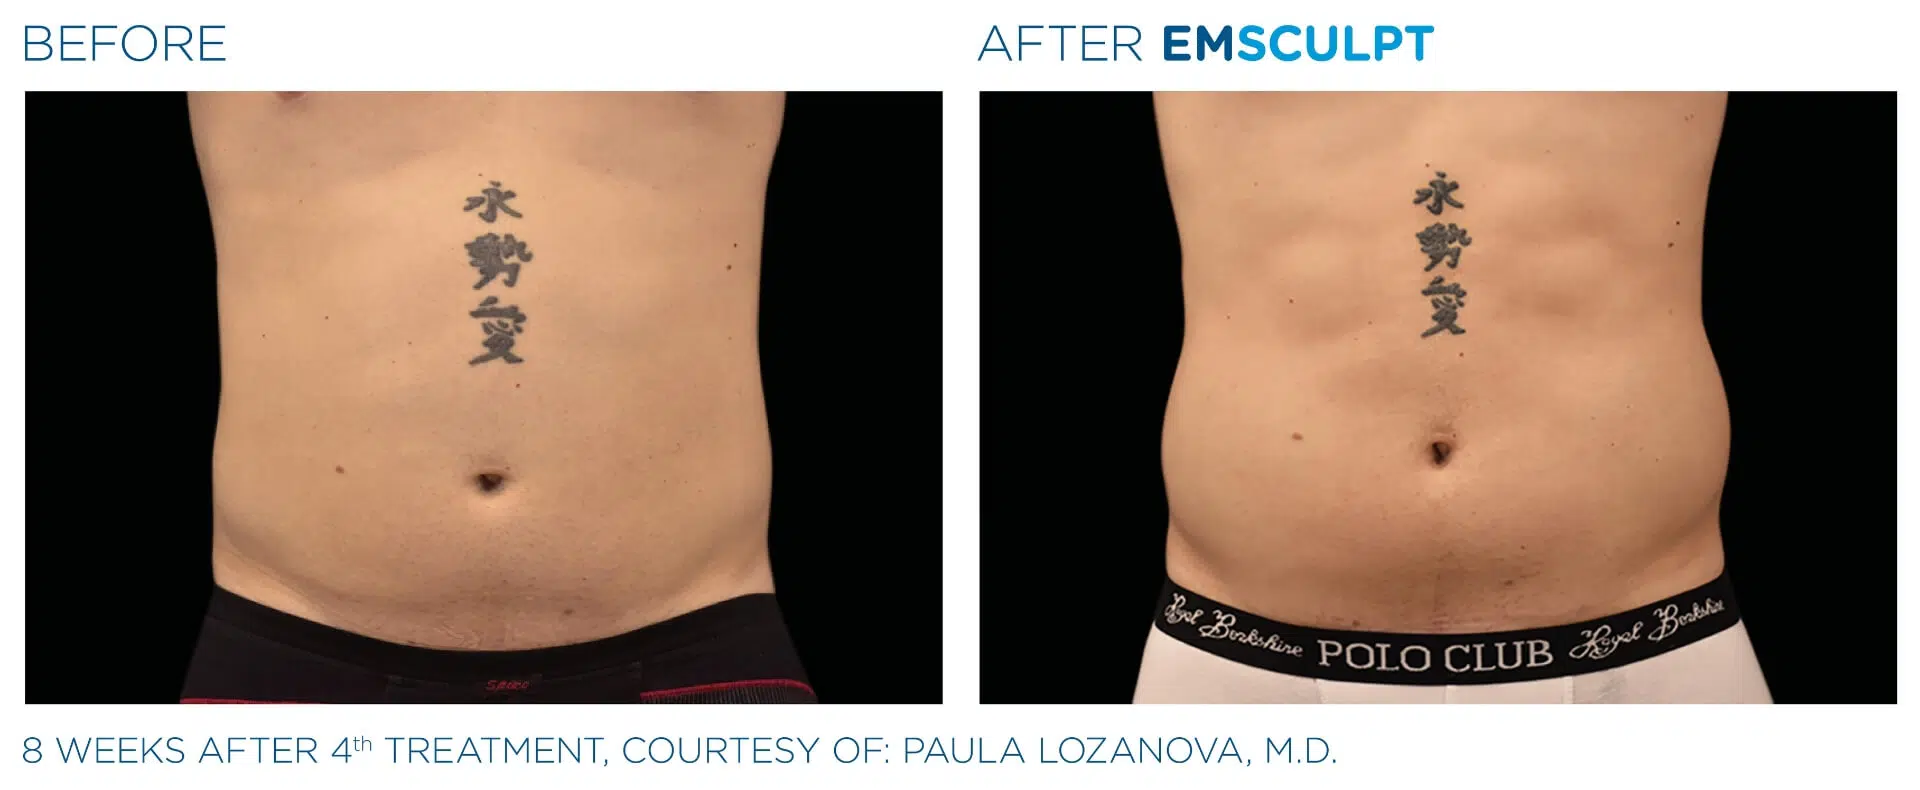 Emsculpt abdomen before and after results.